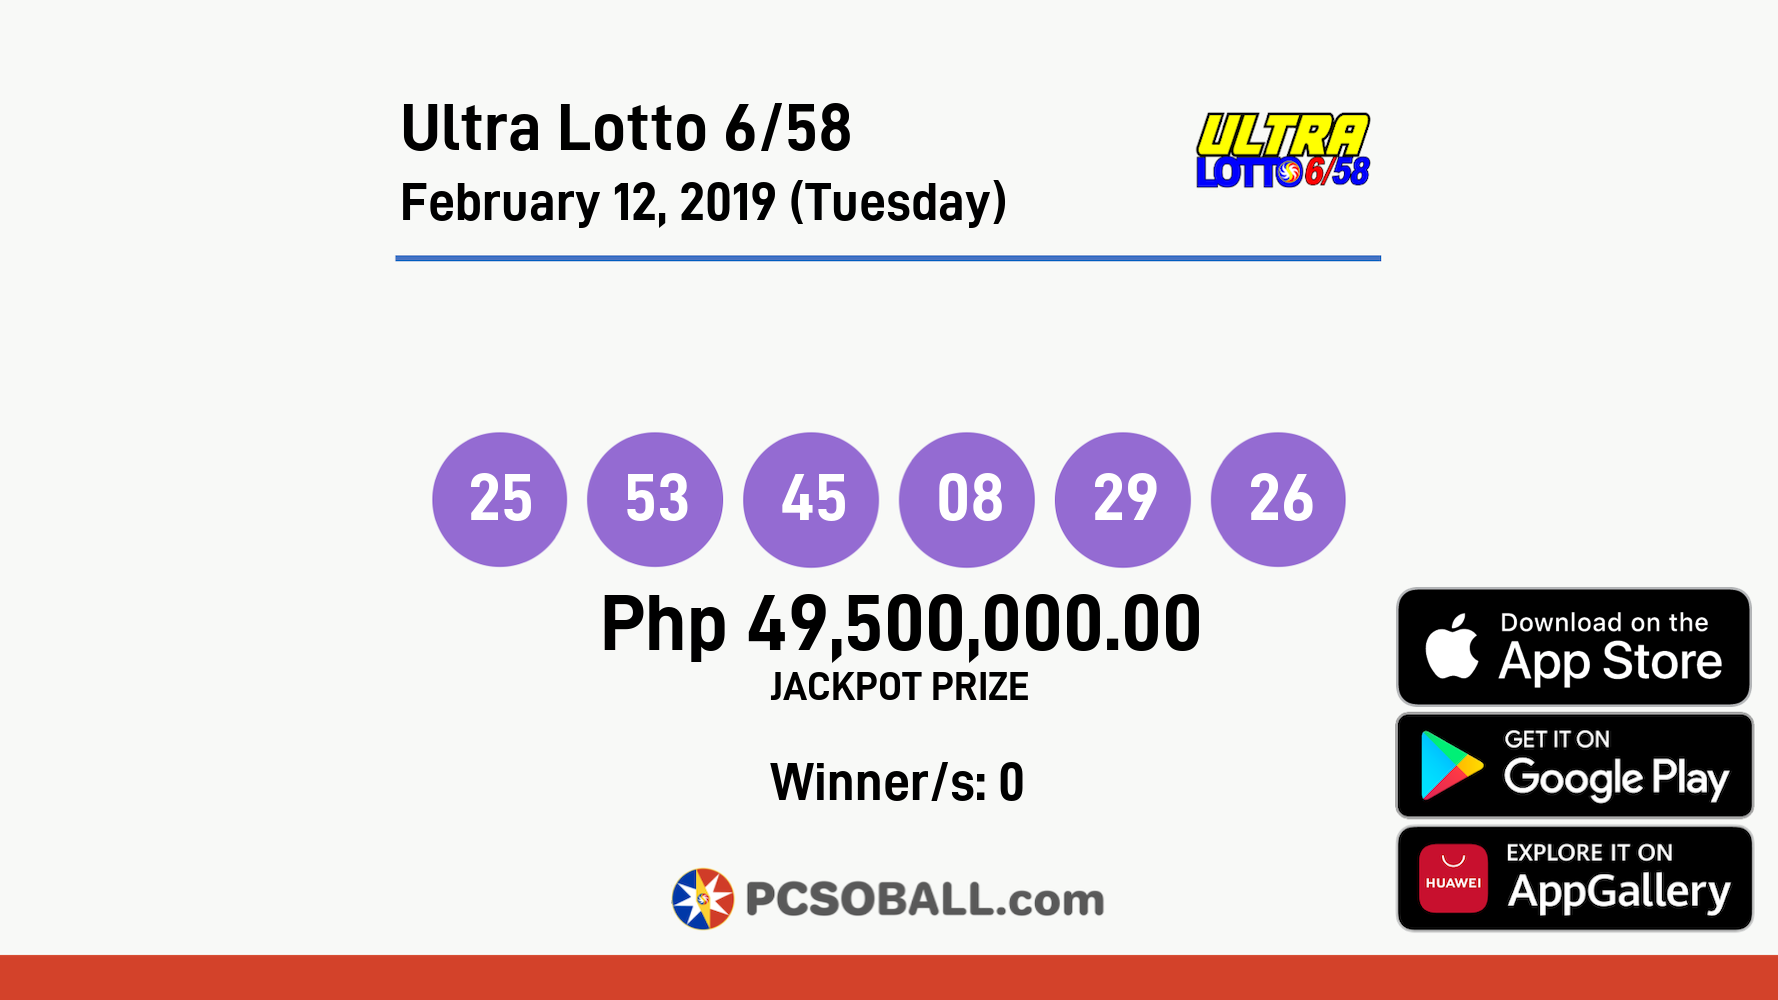 Ultra Lotto 6/58 February 12, 2019 (Tuesday) Result